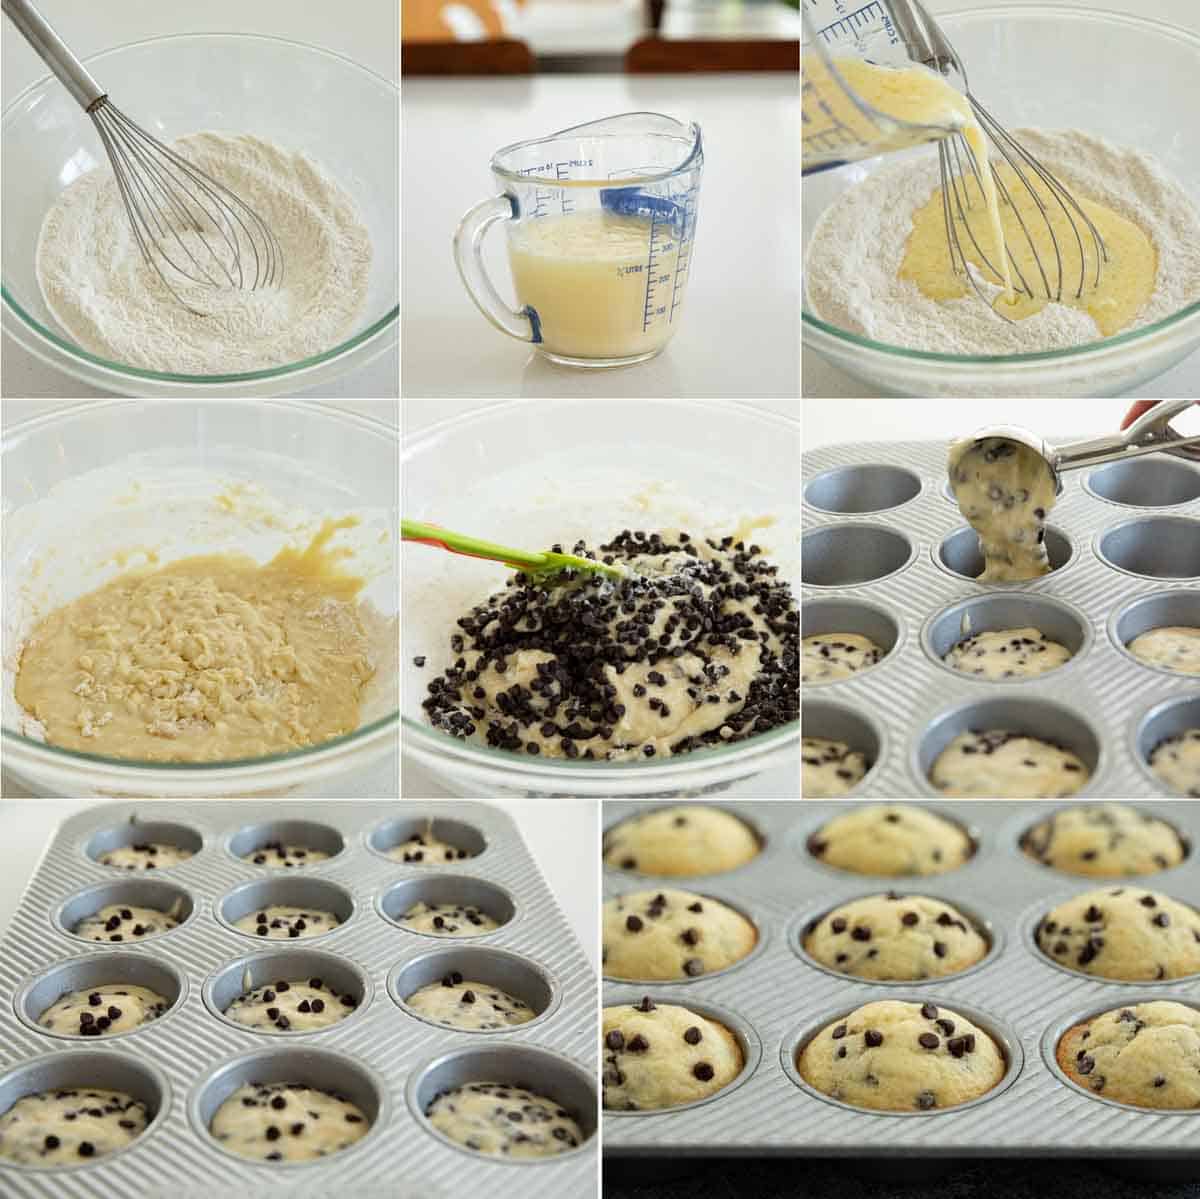 steps to make chocolate chip muffins